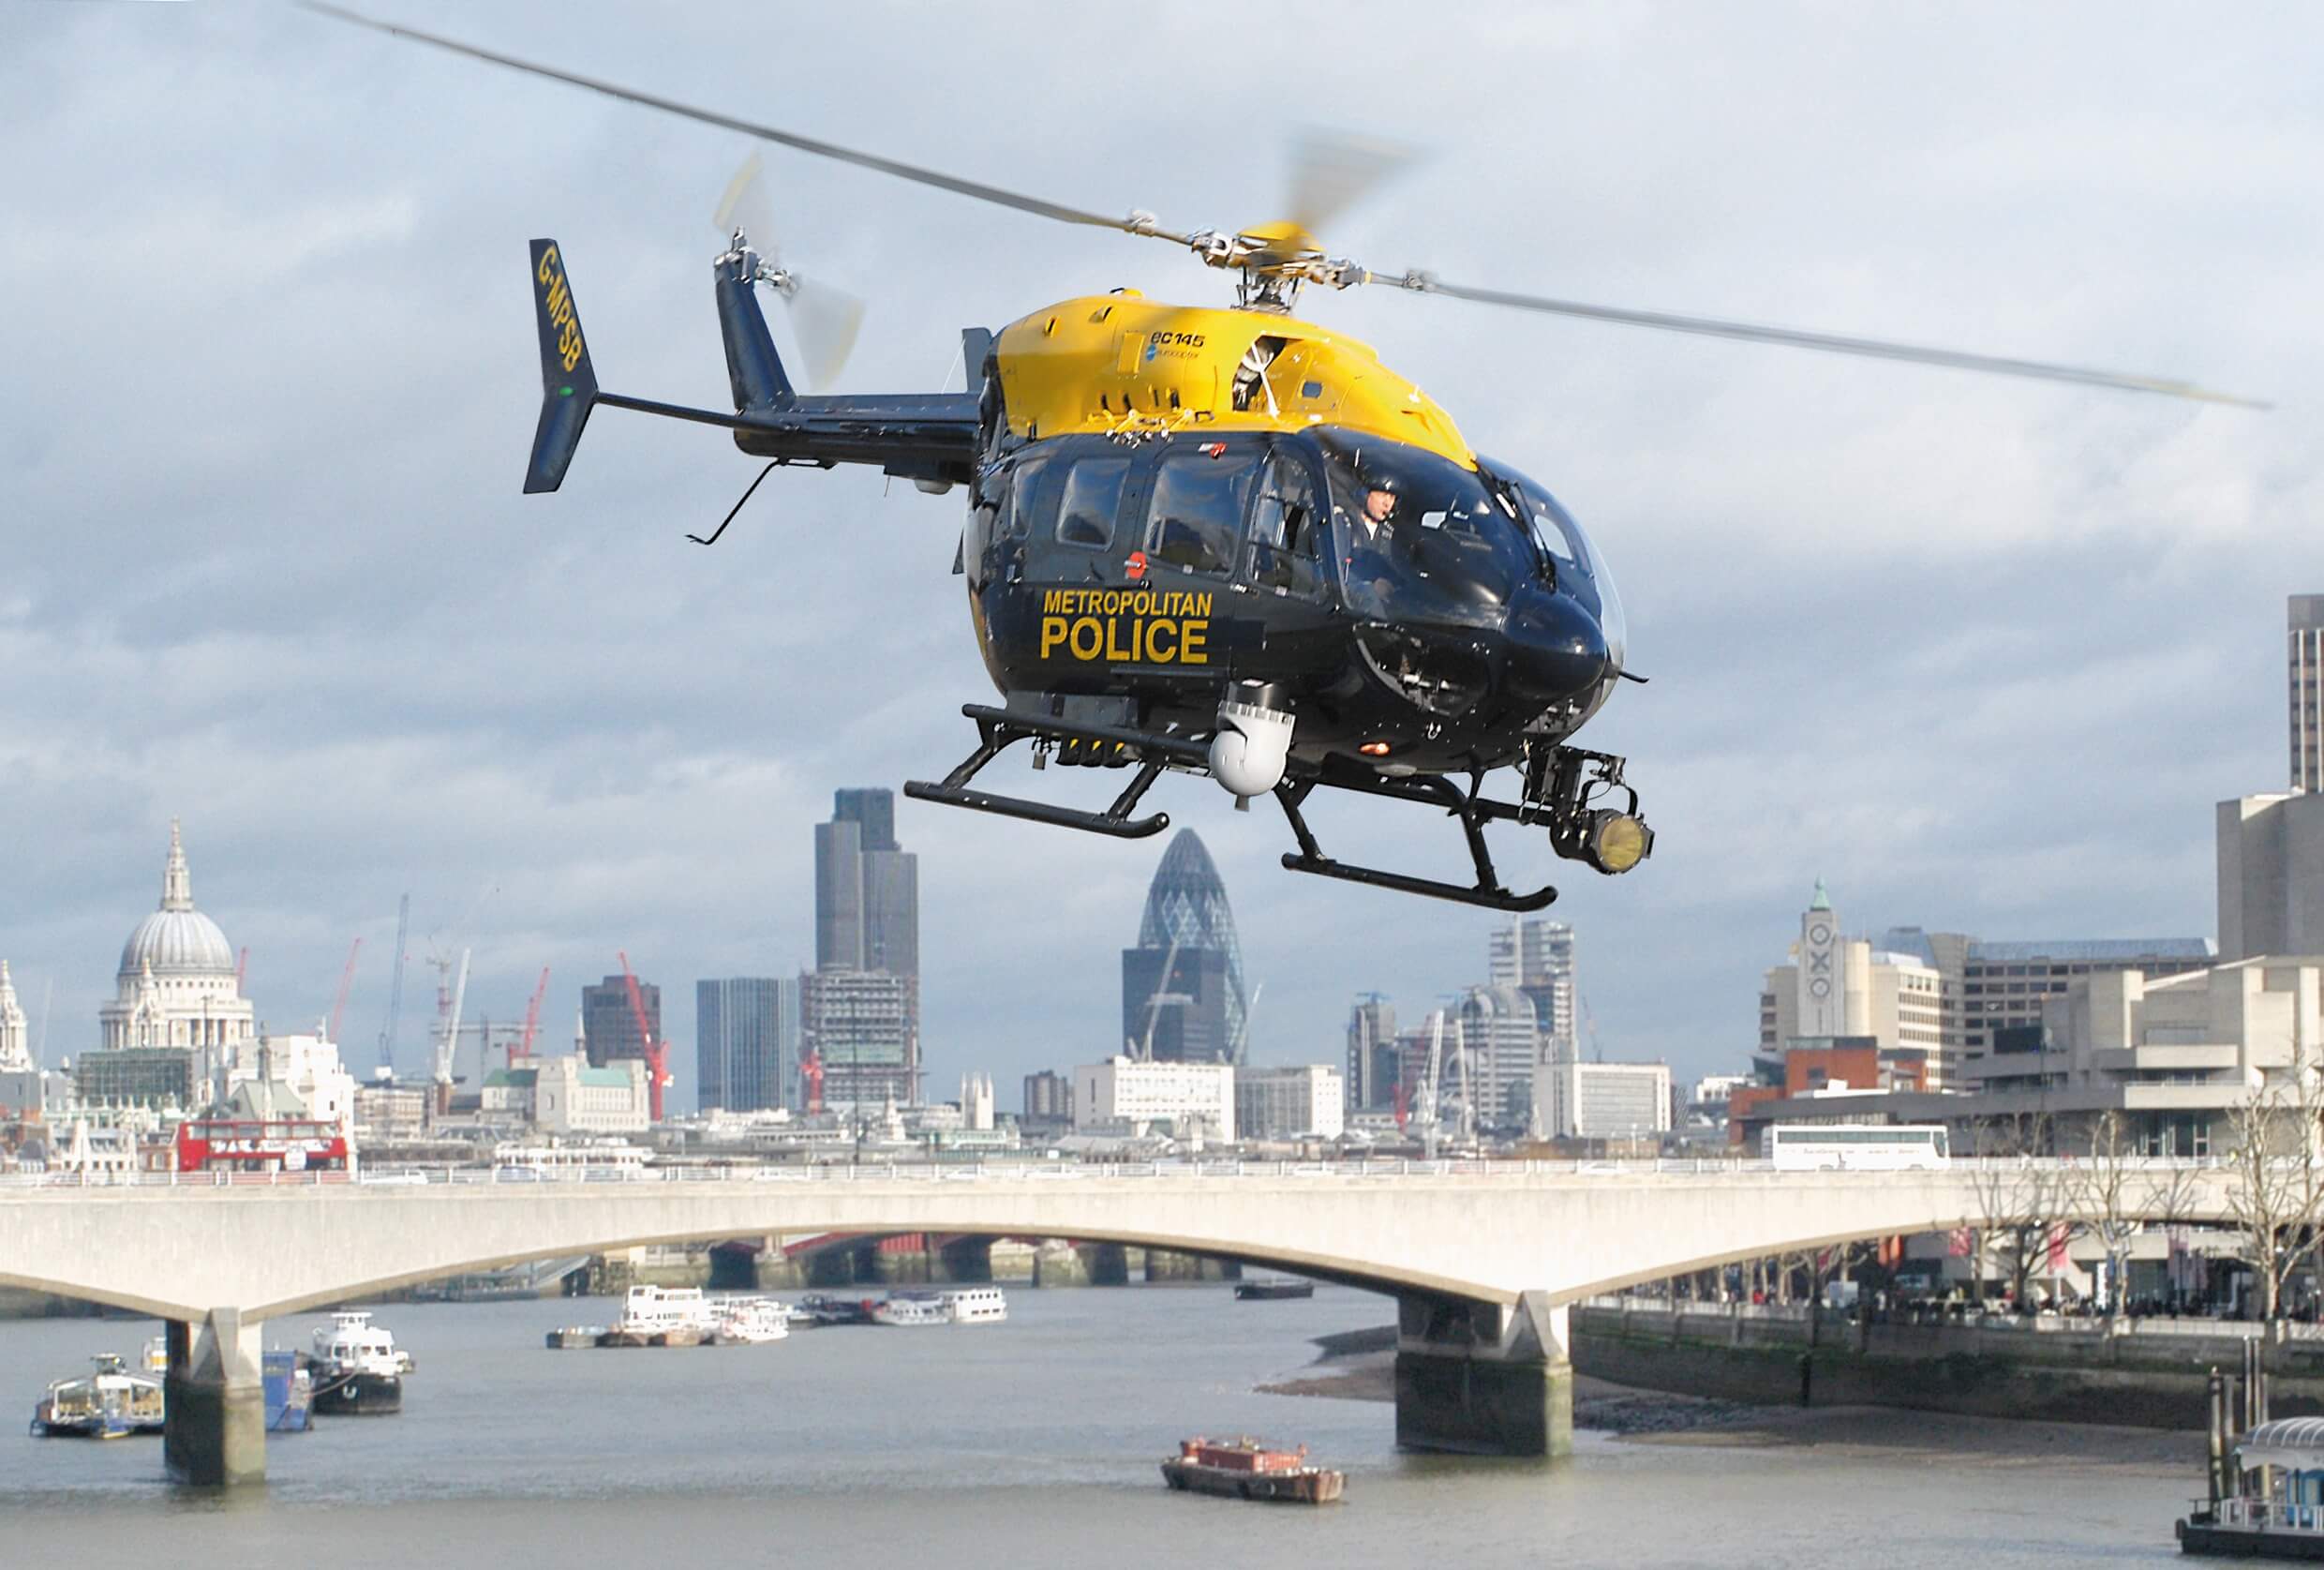 National Police Air Service selects Airbus for helicopter fleet support and maintenance